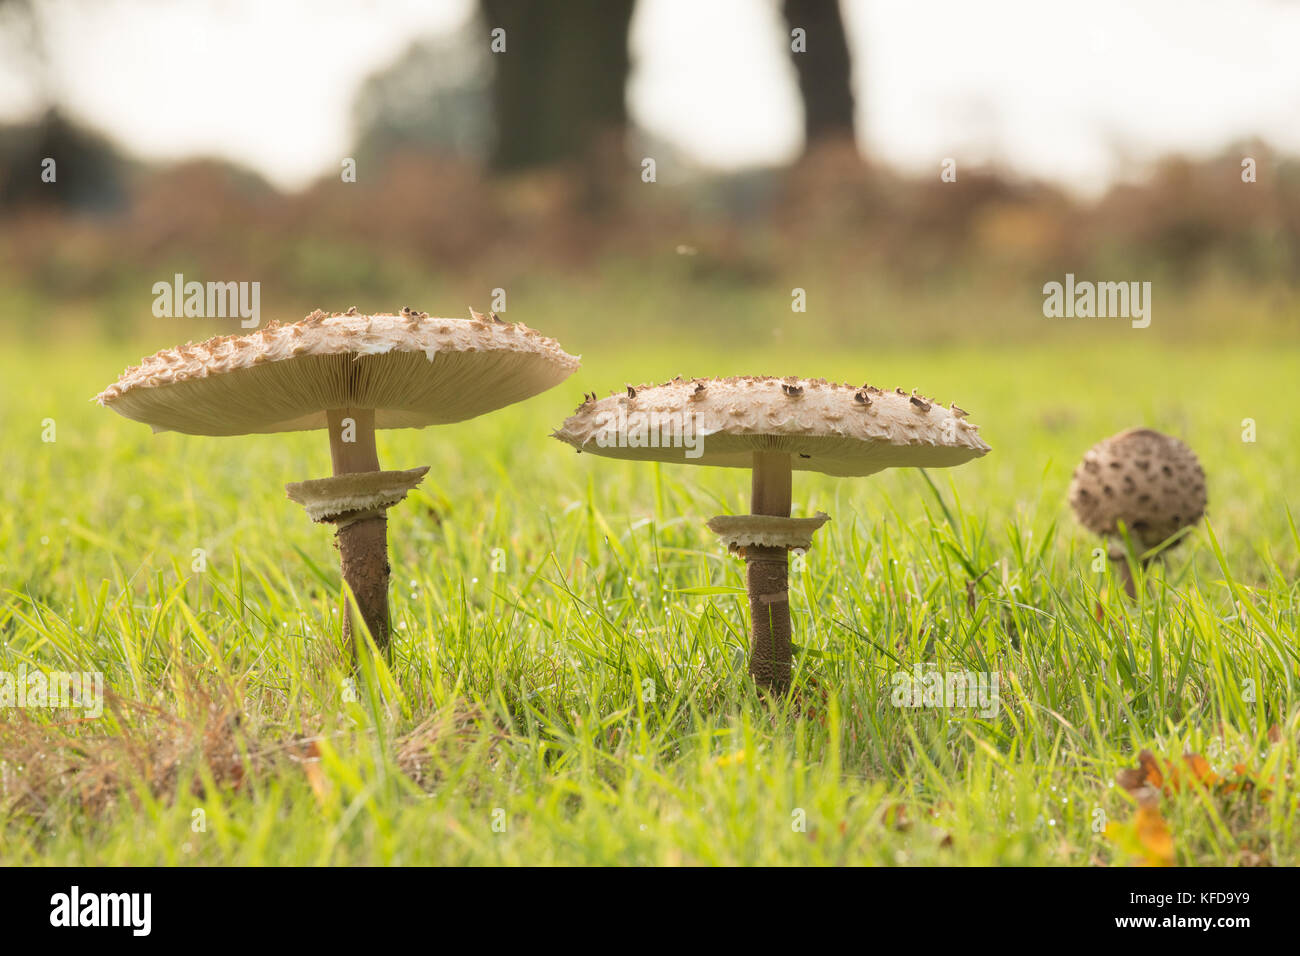 Edible parasol mushrooms in a field in East Anglia, England. Stock Photo